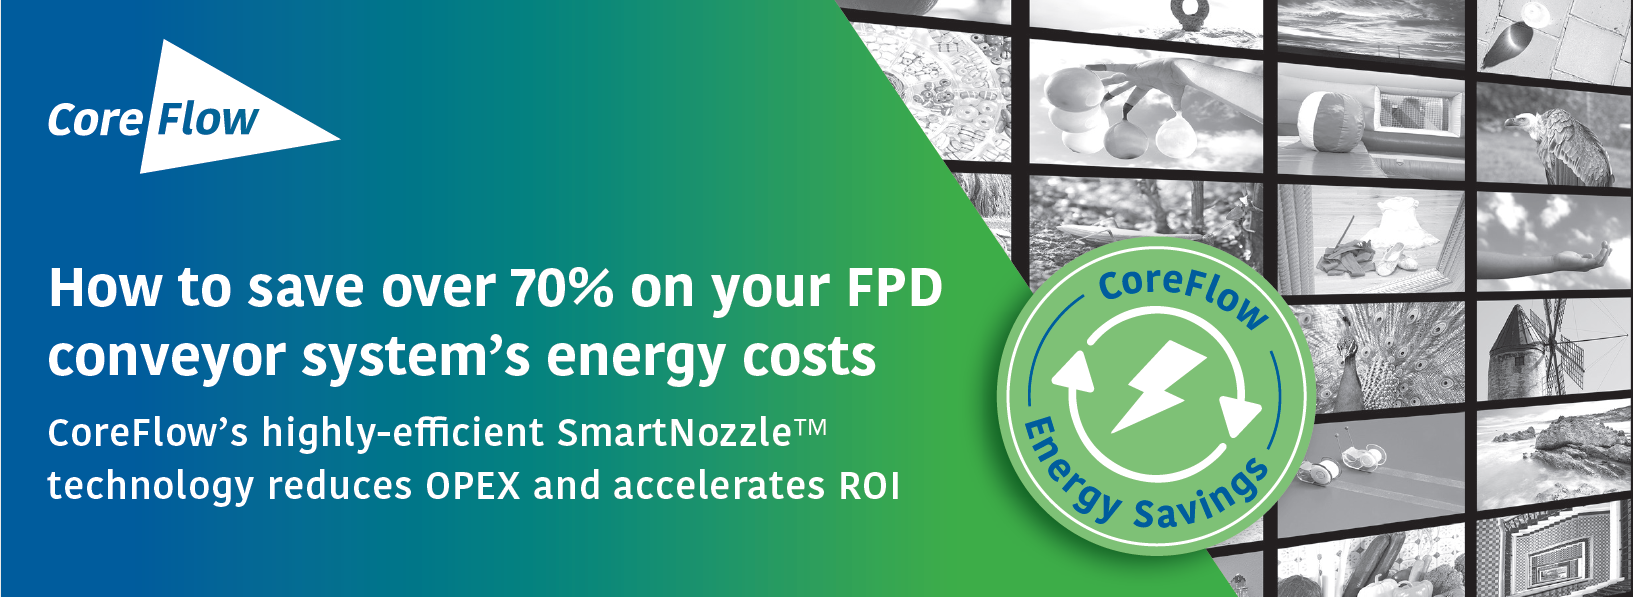 CoreFlow publishes article on energy-savings in the FPD and semiconductor manufacturing industry